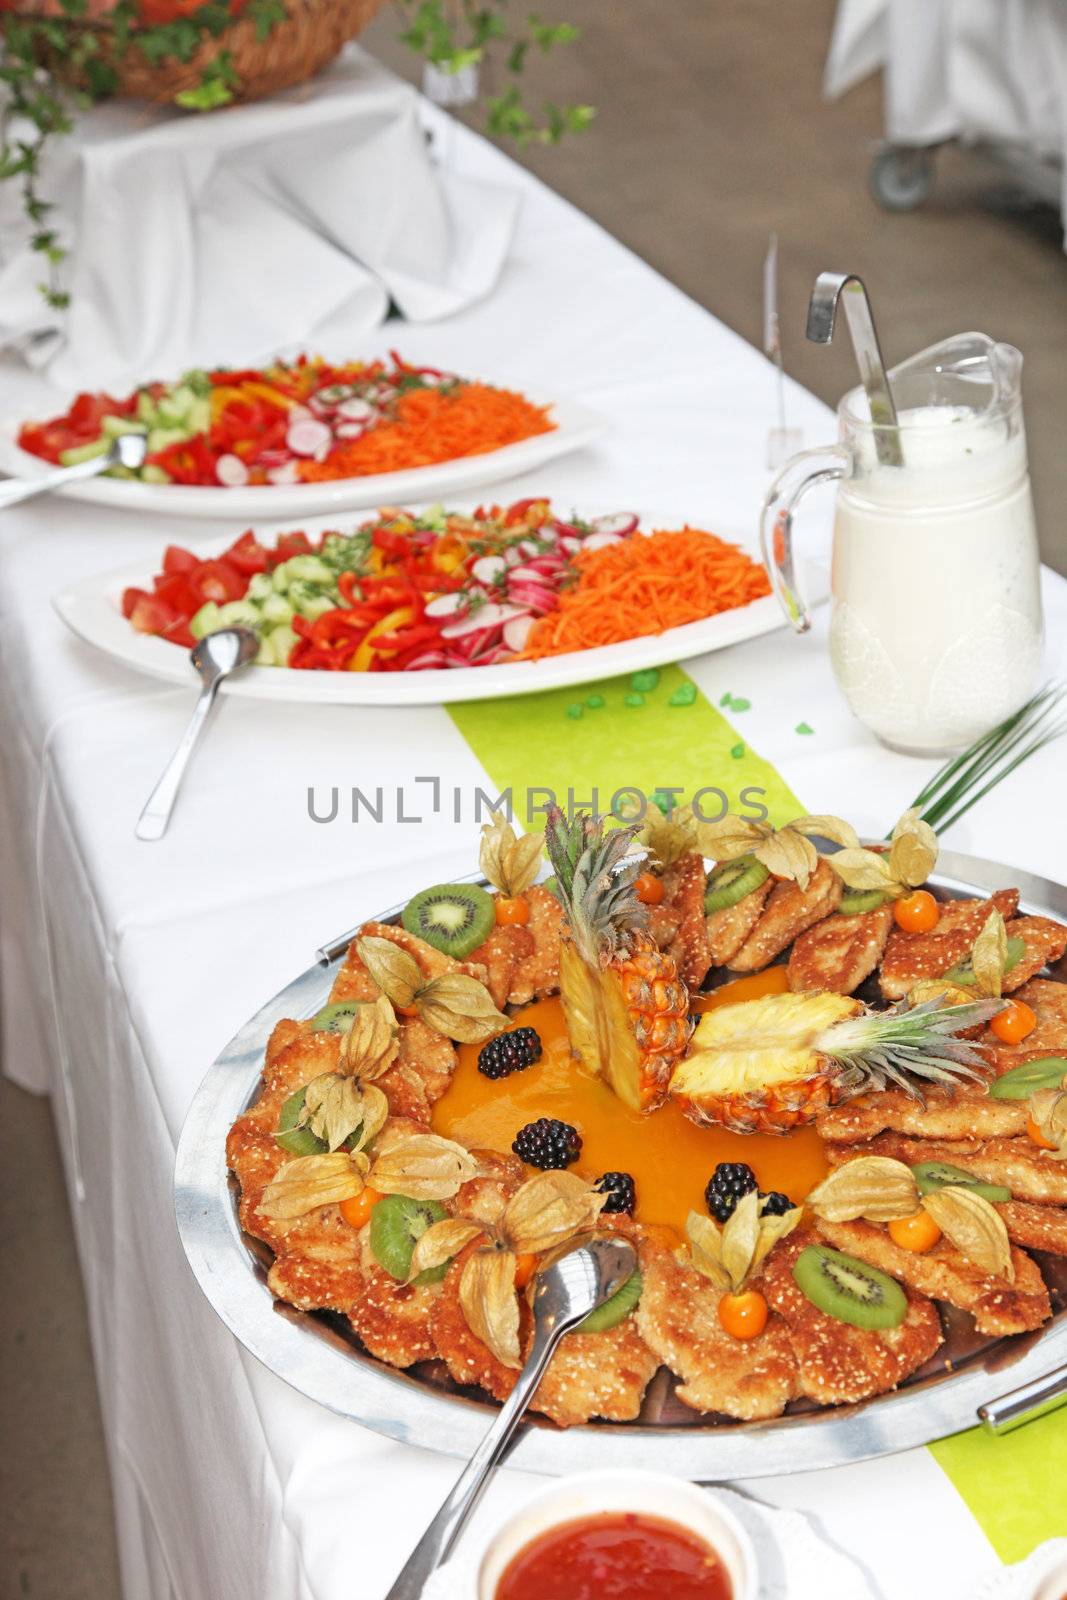 Buffet of different foods - horizontal format